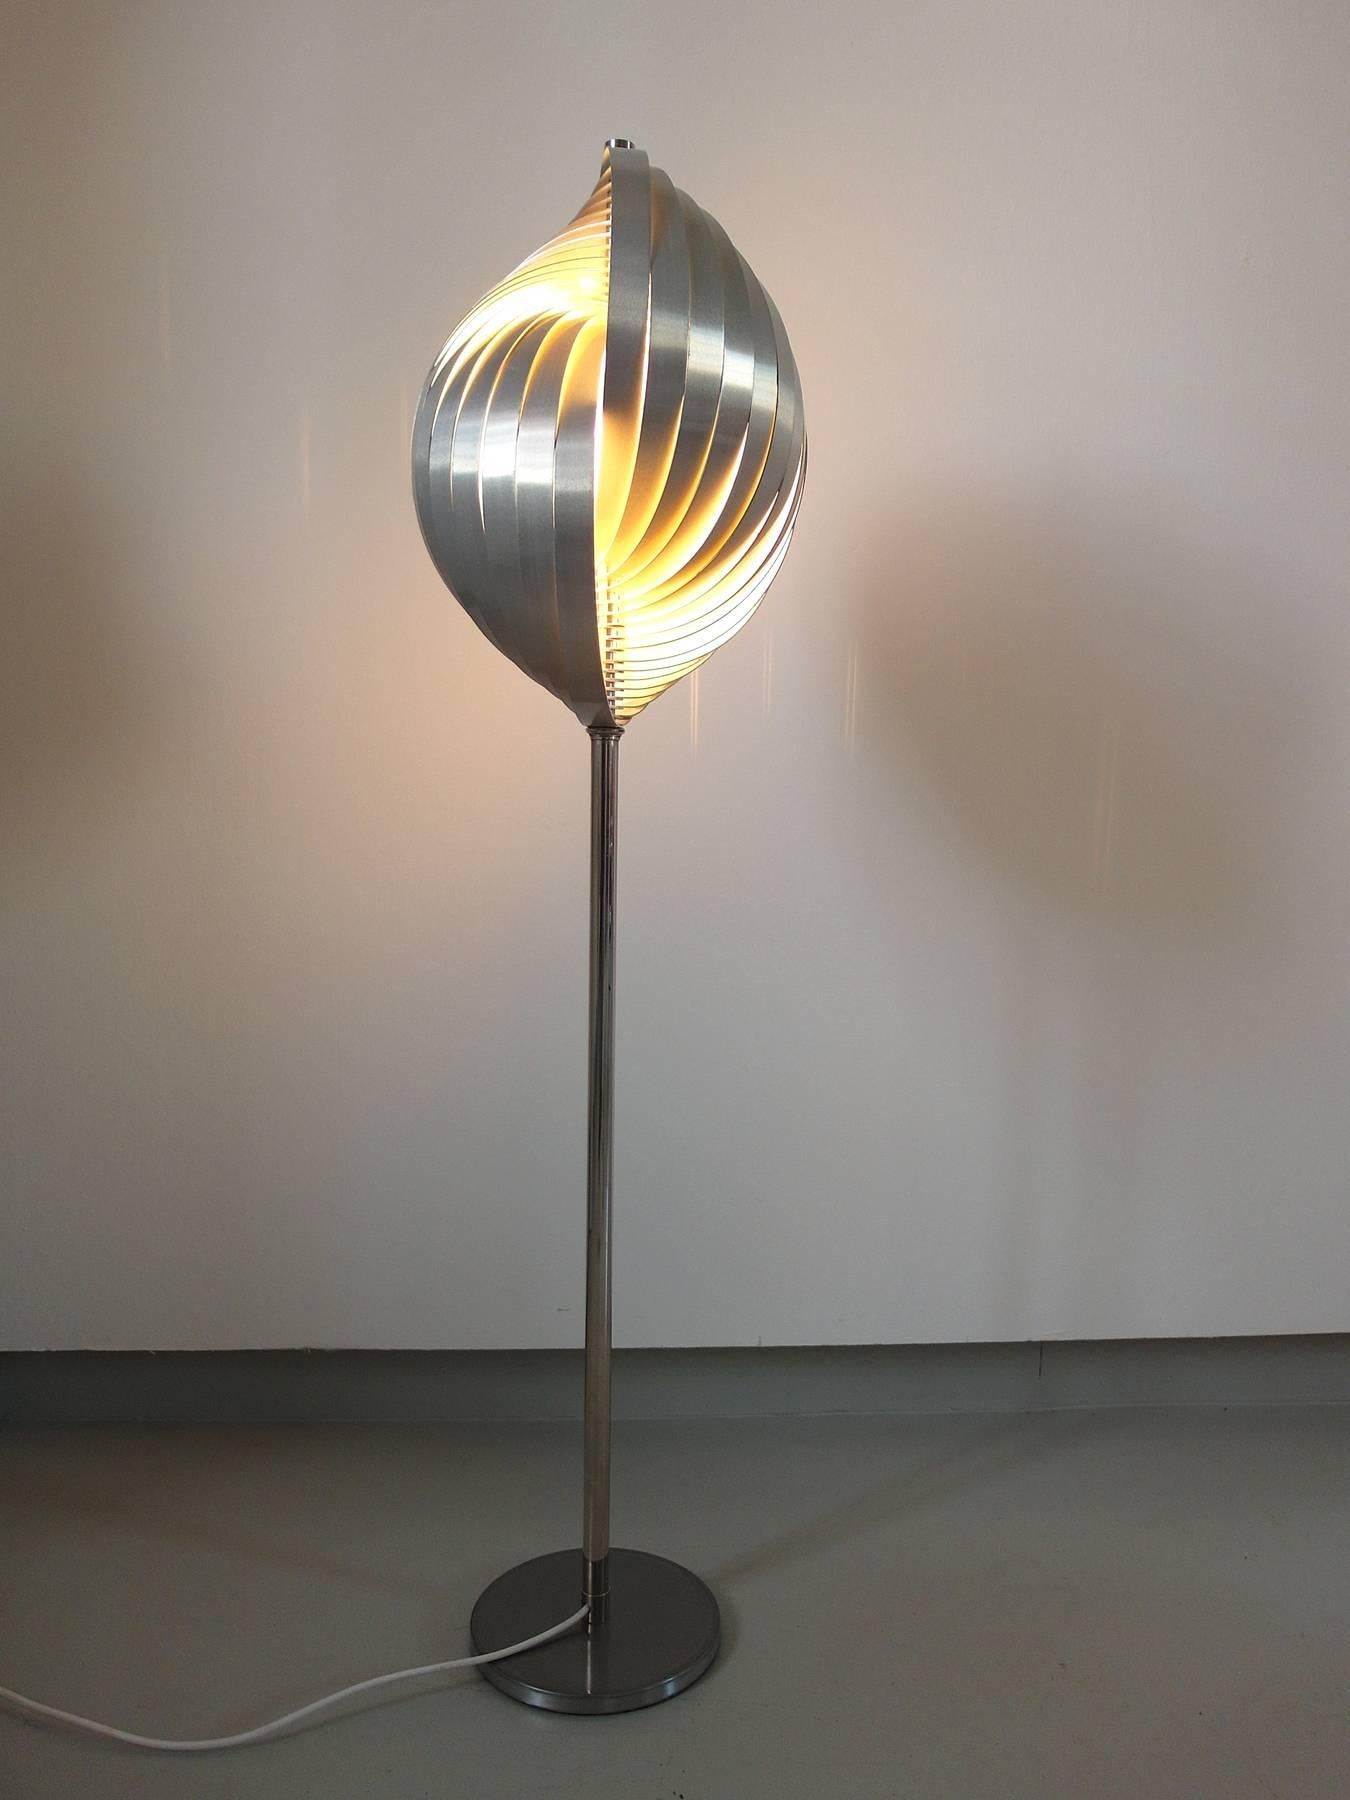 Magnificent shell shaped brushed aluminium floor lamp designed by Henri Mathieu for Mathieu Lustrerie, circa 1970.
The lamp is made of aluminium slats which form the spiral shape and spread the light in an amazing joyful and decorative way. 
The